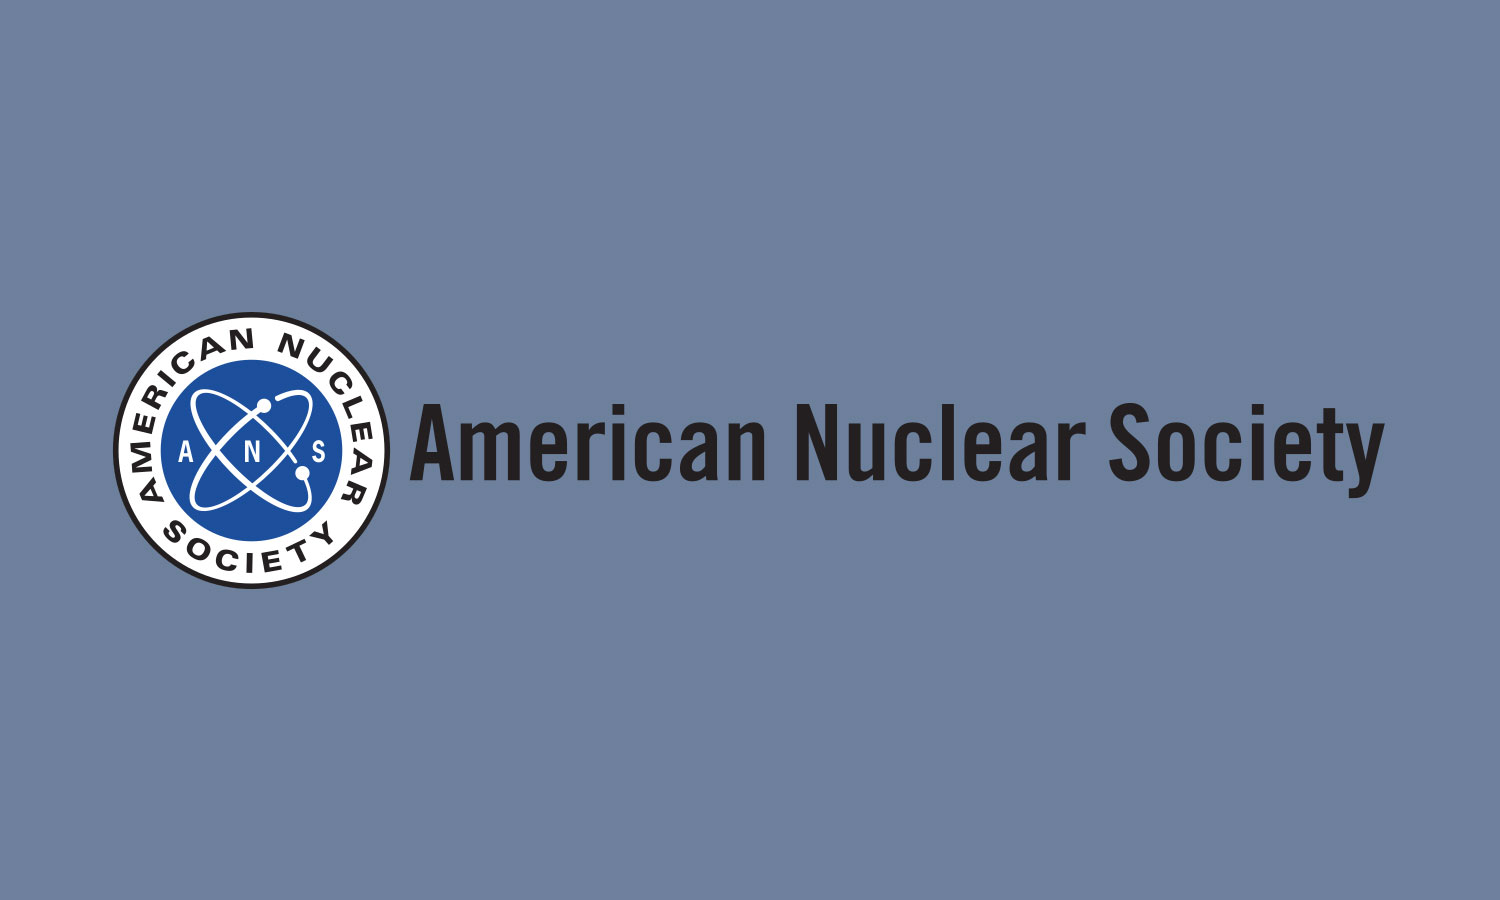 American Nuclear Society logo and text